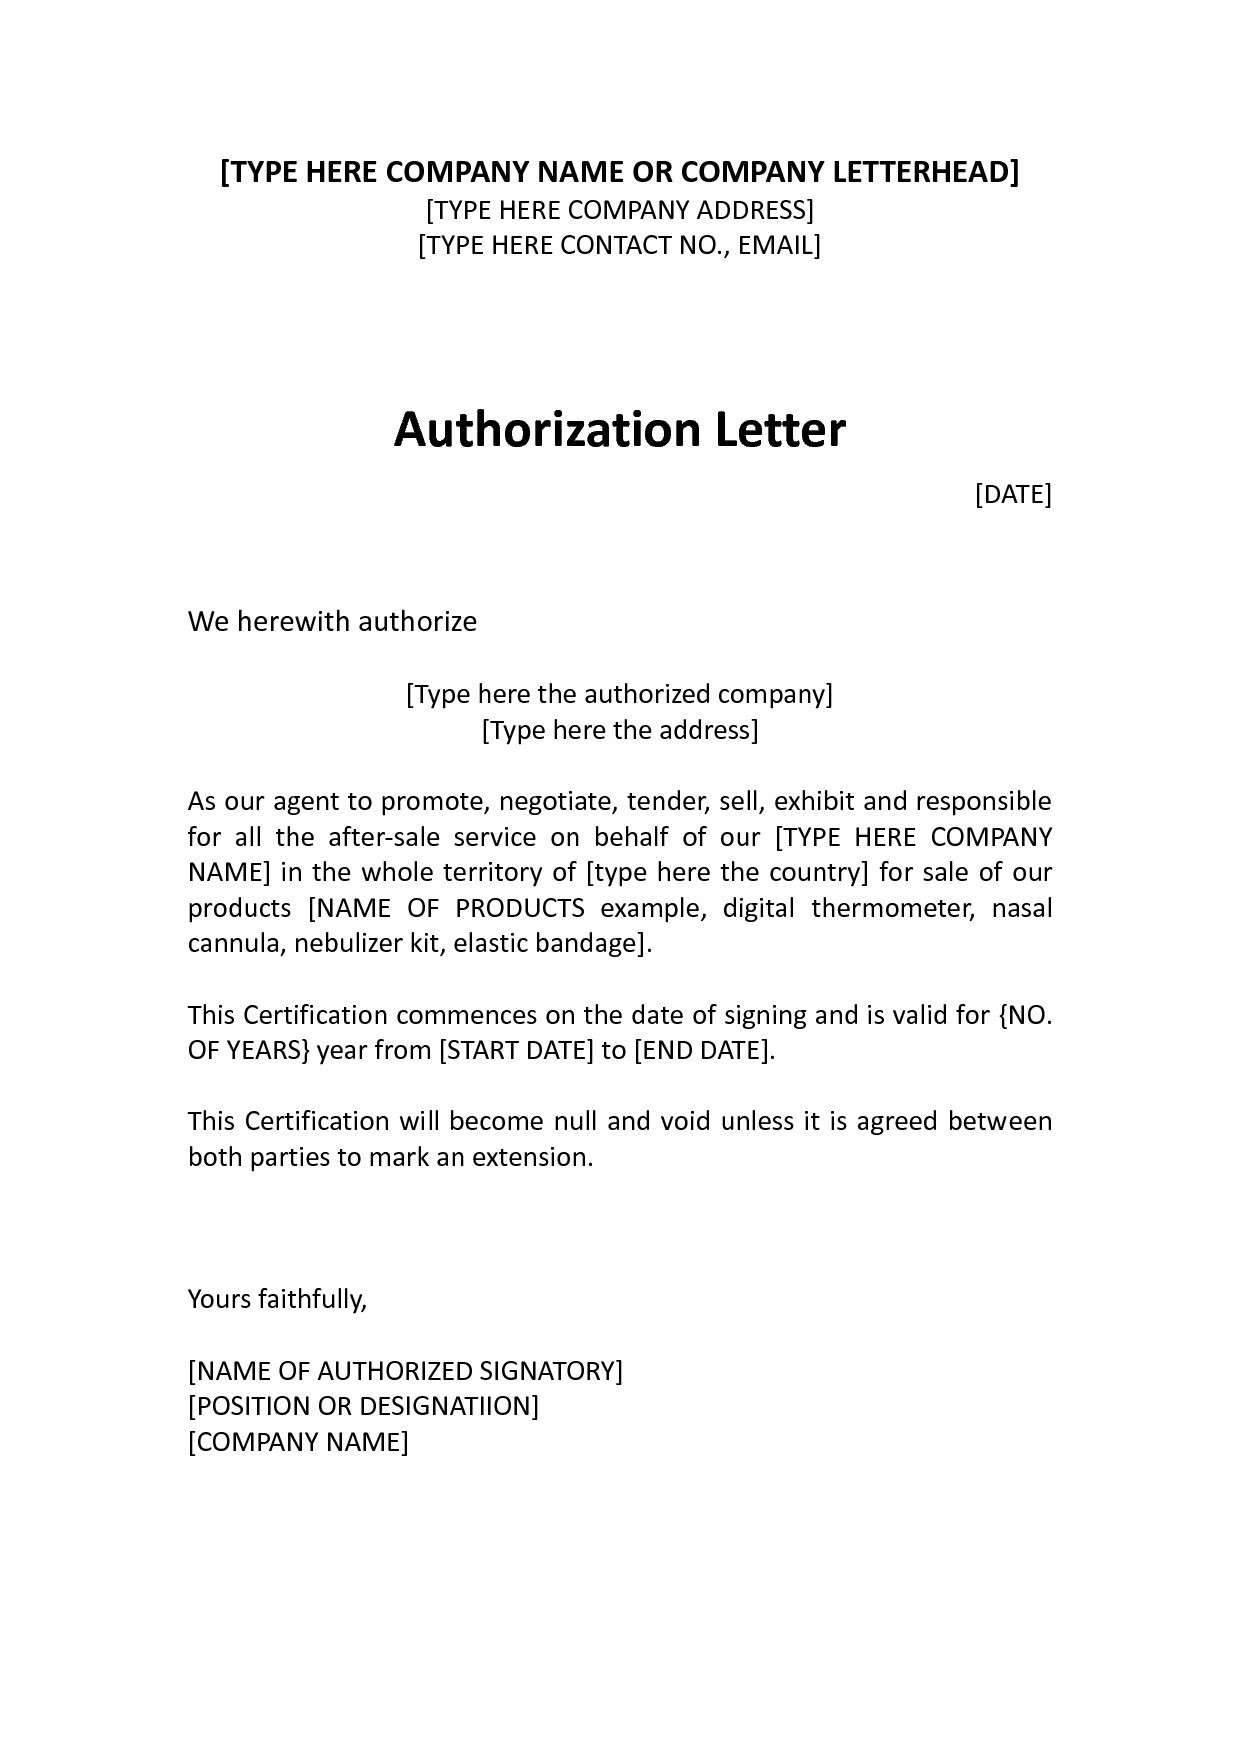 Sample Letter of Authorization to Represent Company